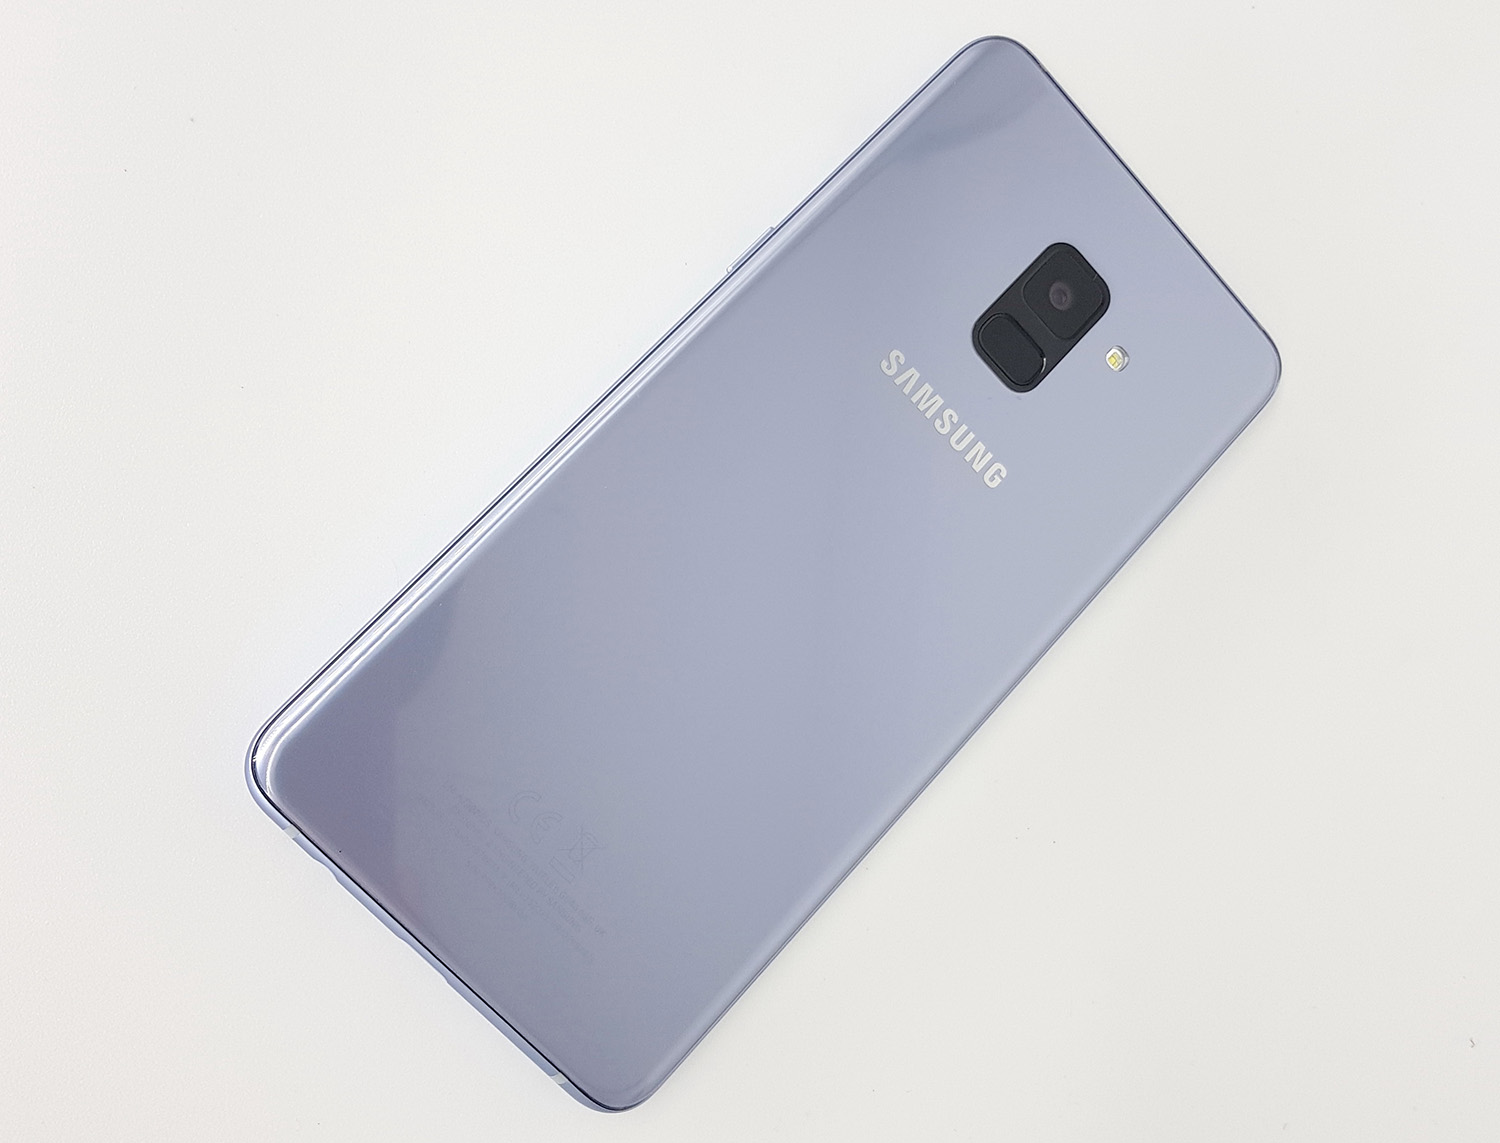 Review: Samsung Galaxy A8+ gets top marks